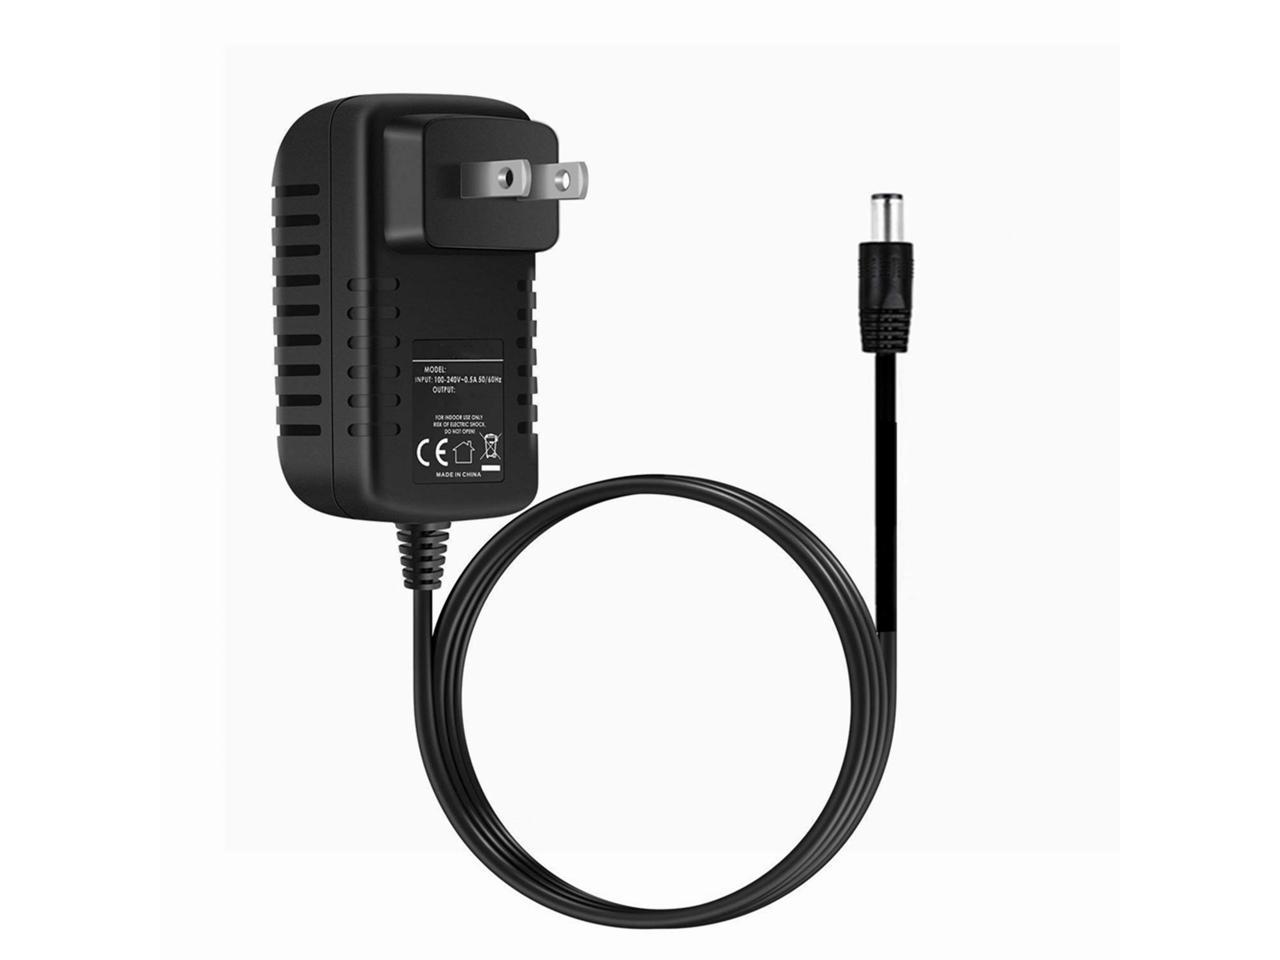 CXR700C 2-Way Radio HOME WALL Charger Replacement for Cobra MicroTalk CXR700 